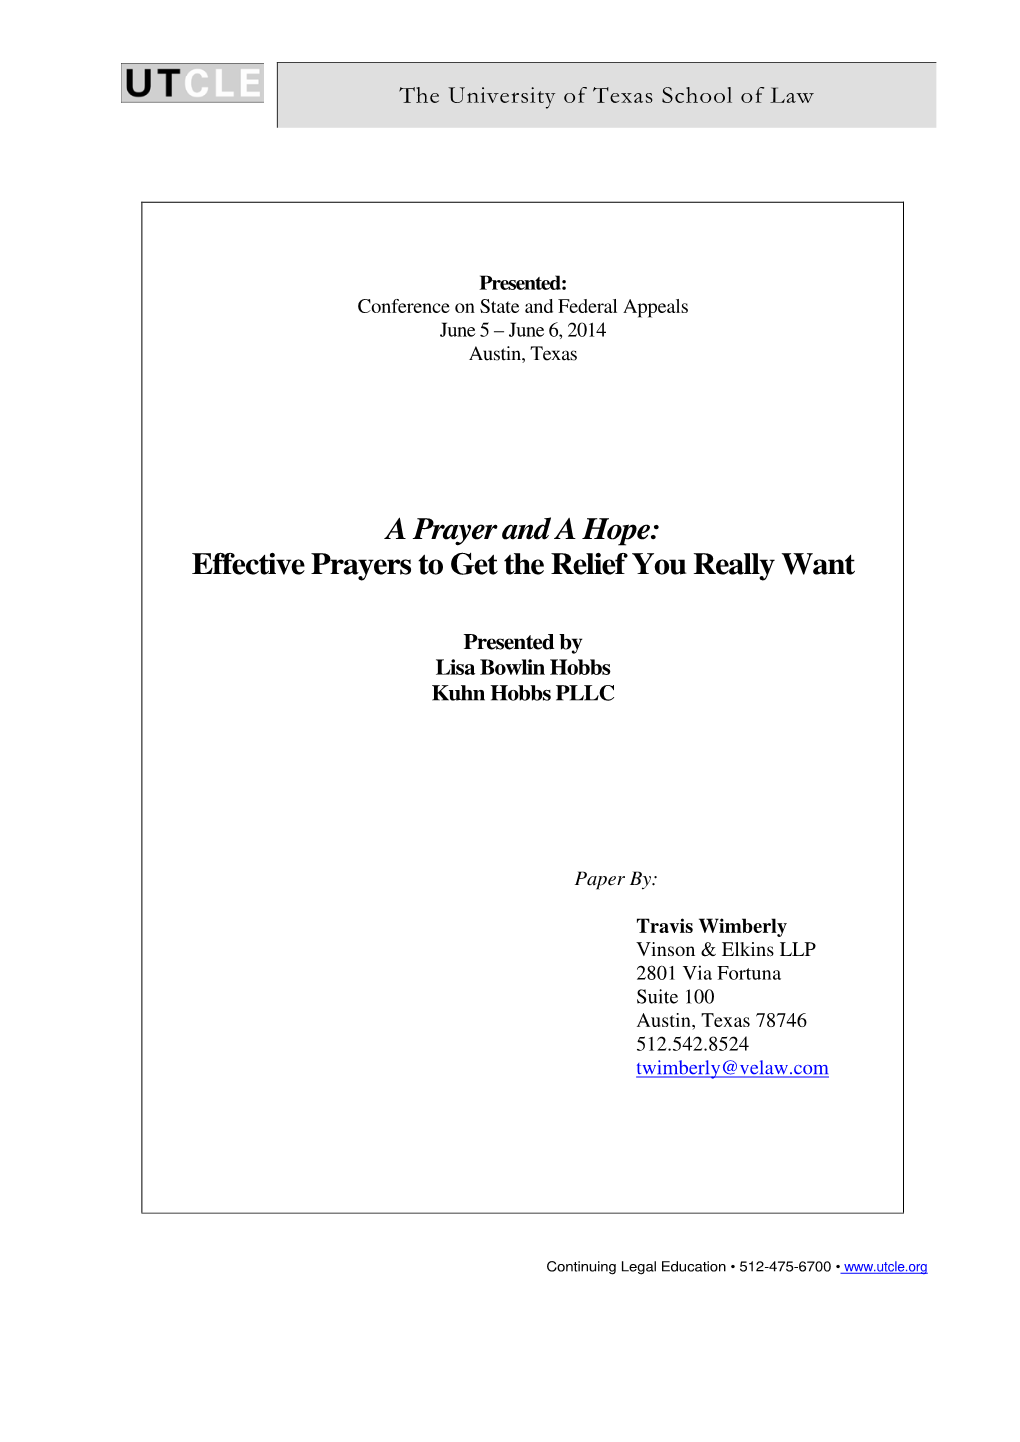 A Prayer and a Hope: Effective Prayers to Get the Relief You Really Want